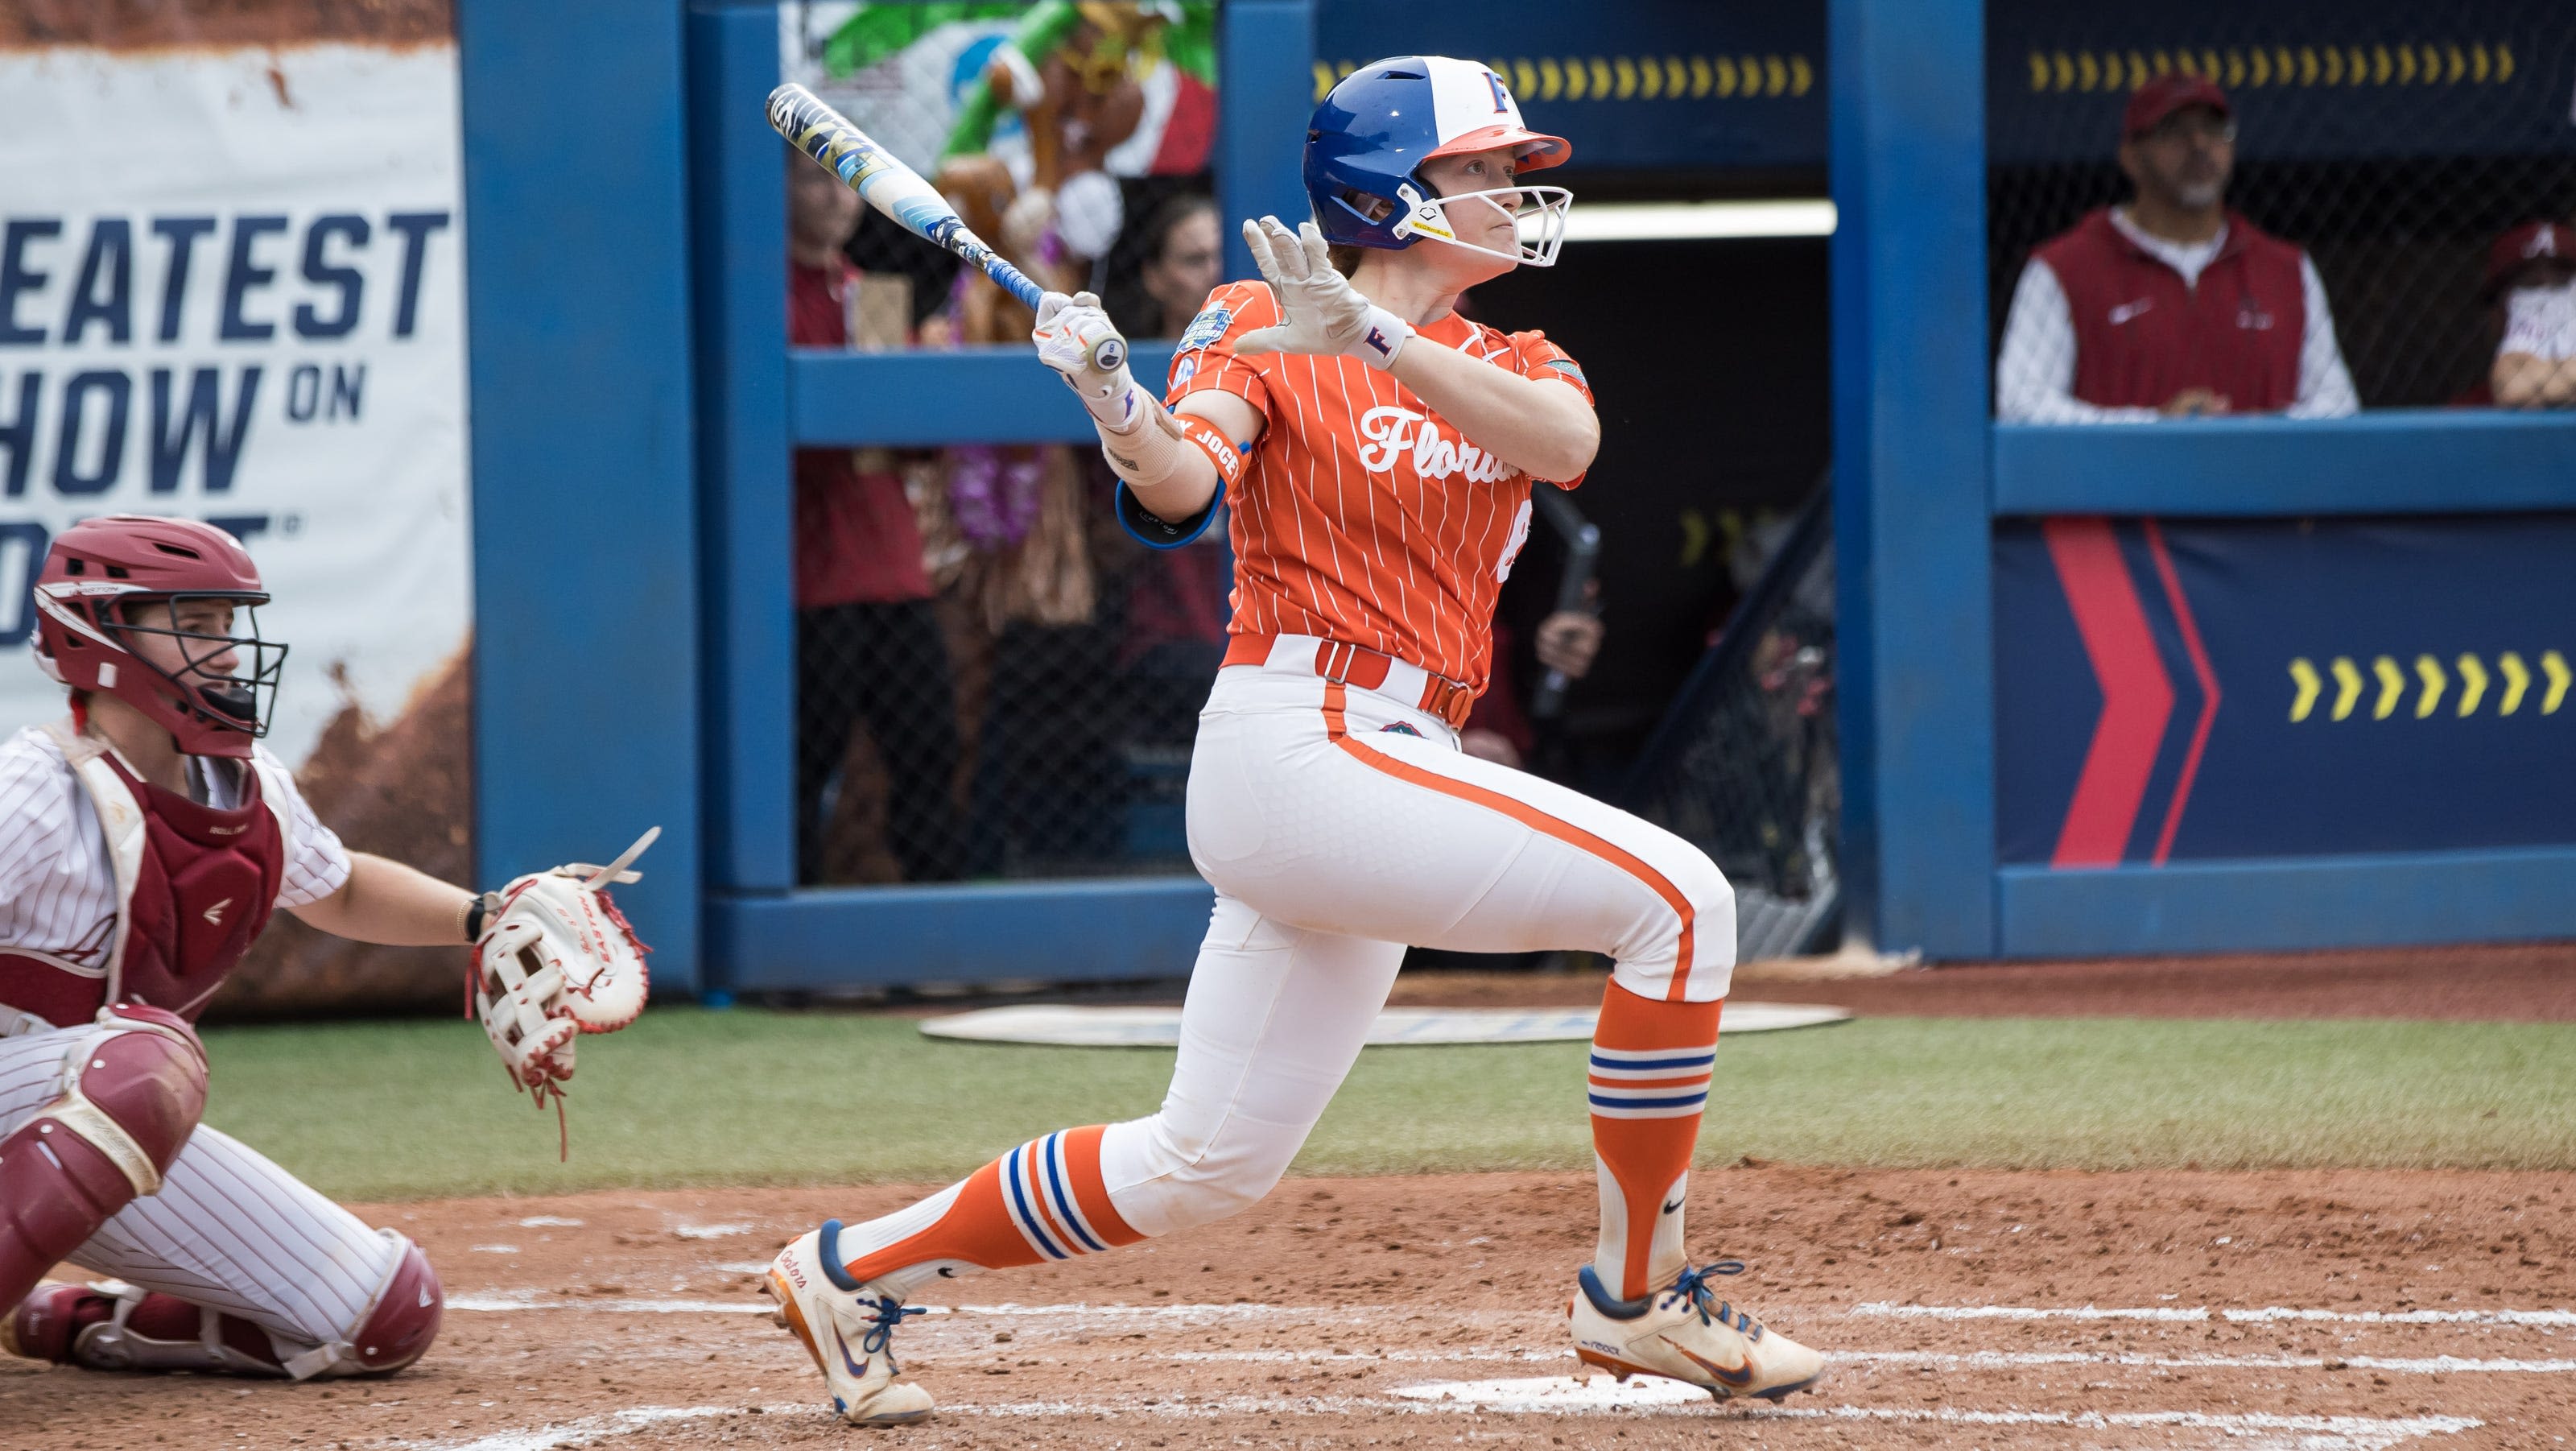 Florida softball vs Oklahoma live scores, updates, highlights from WCWS semifinal game